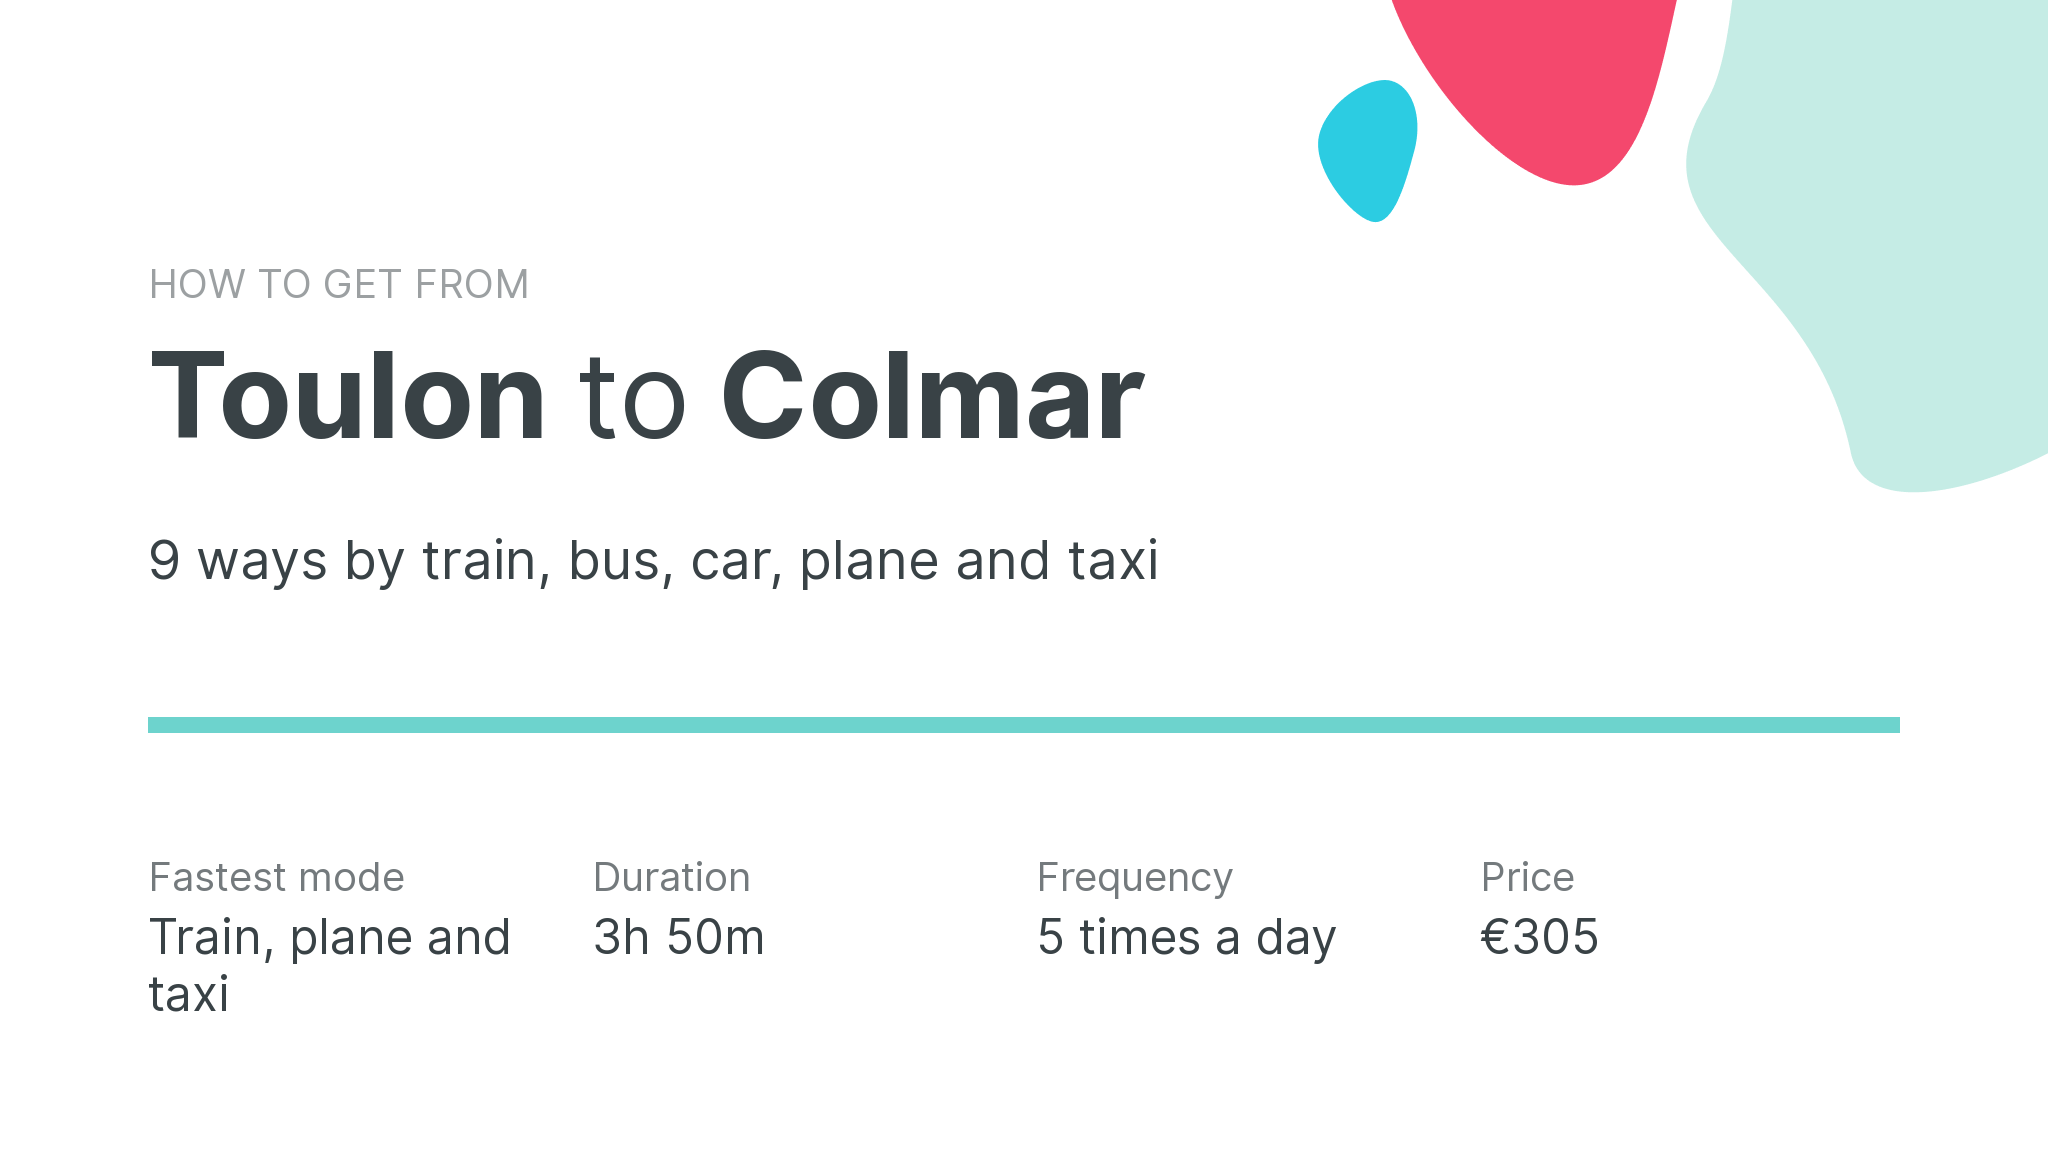 How do I get from Toulon to Colmar